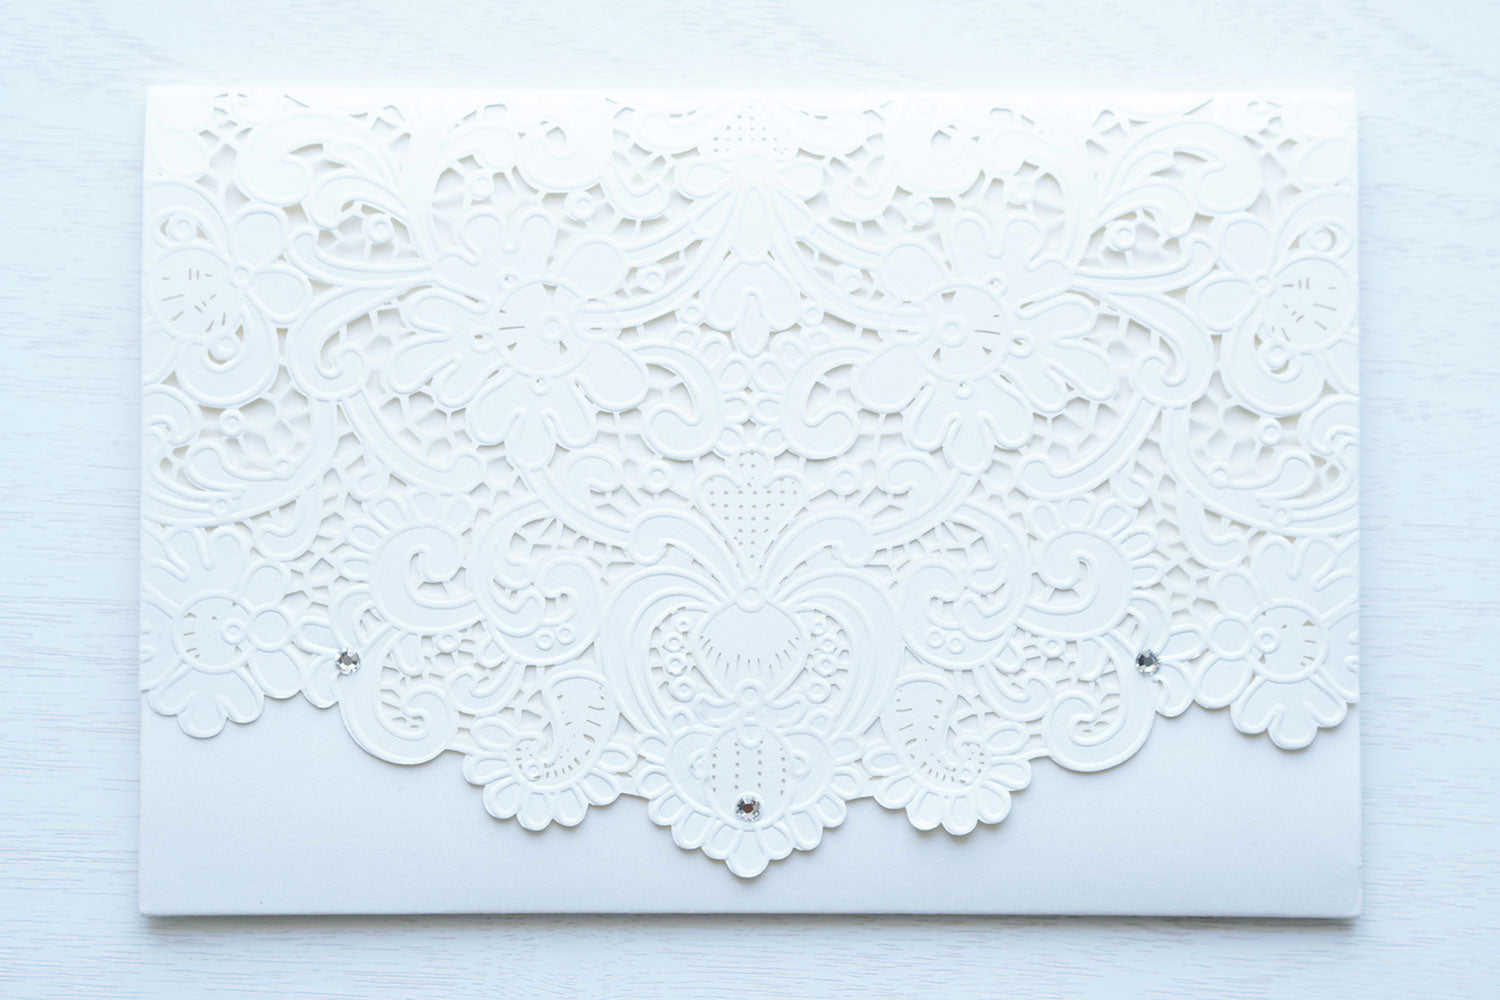 alt="Graceful ivory pearlescent shimmer laser cut pocket fold wedding invitation features an ivory pearlescent shimmer stock on gold mirror and glitter stock layers and encompasses a regal gold frame design with monogram, script font and jewel details"